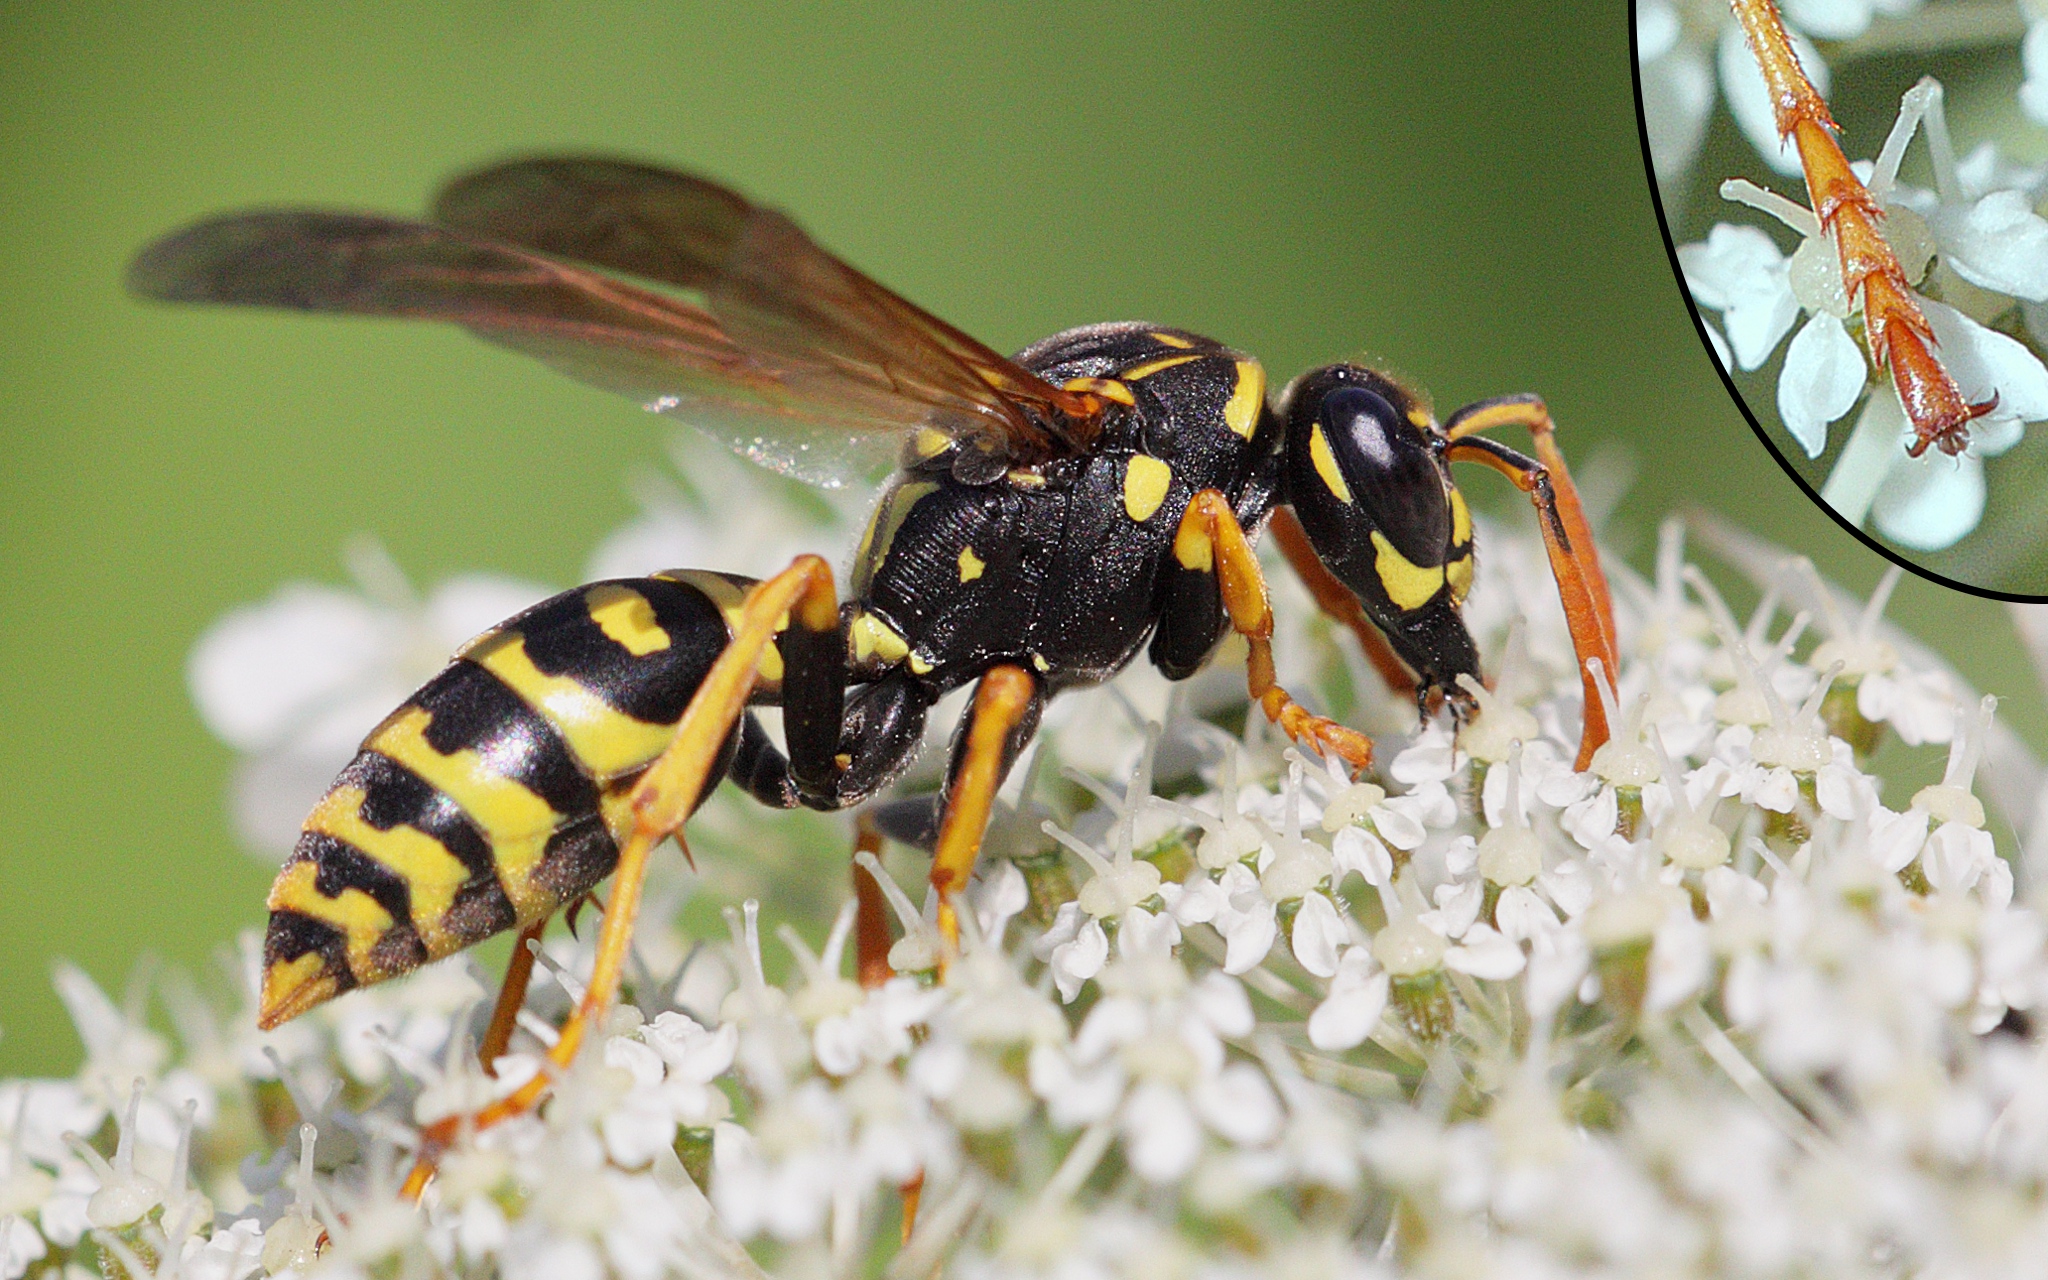 You are currently viewing Risk Assessment and Recommendations for Forester Exposure to Hymenoptera